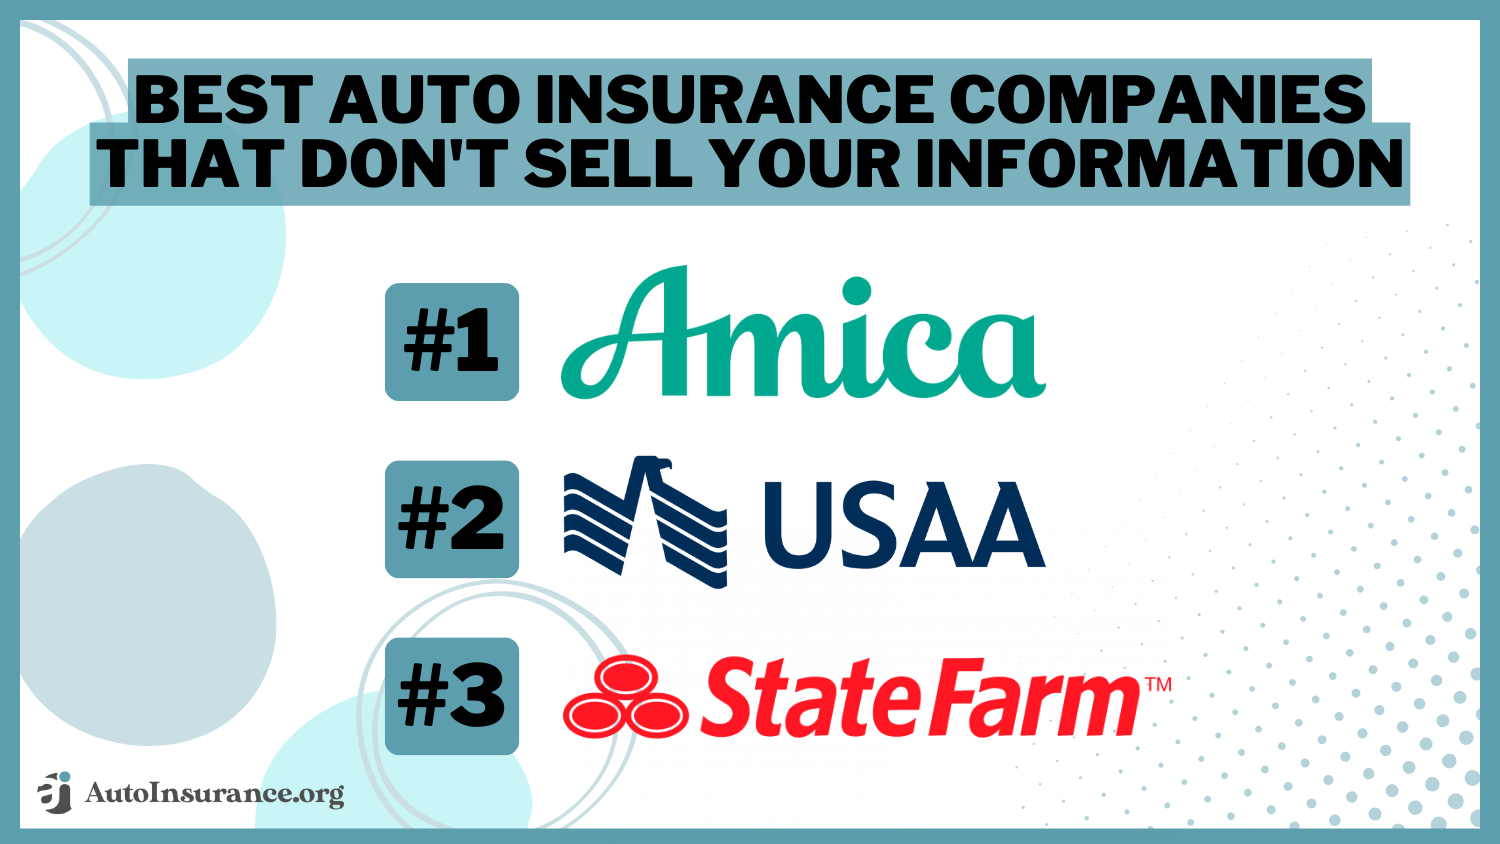 Best Auto Insurance Companies That Don't Sell Your Information: Amica, USAA, State Farm